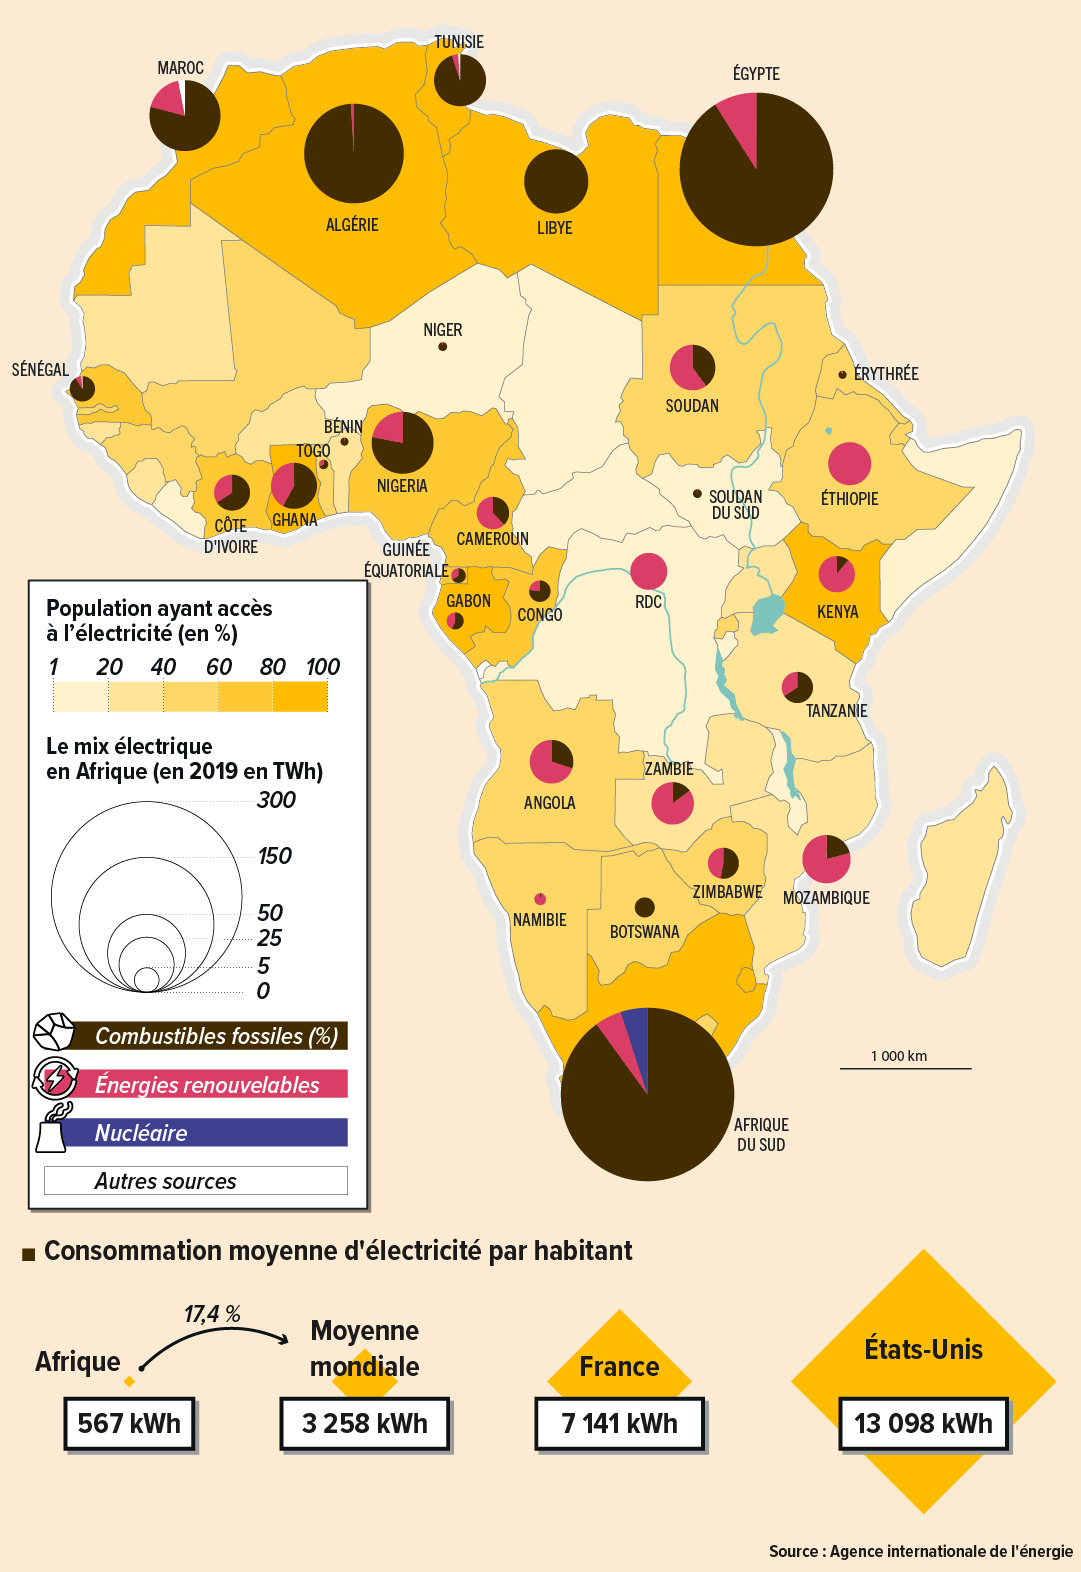 A map showing that electricity access remains below 60% in most African countries, but that many are using renewable sources of generation